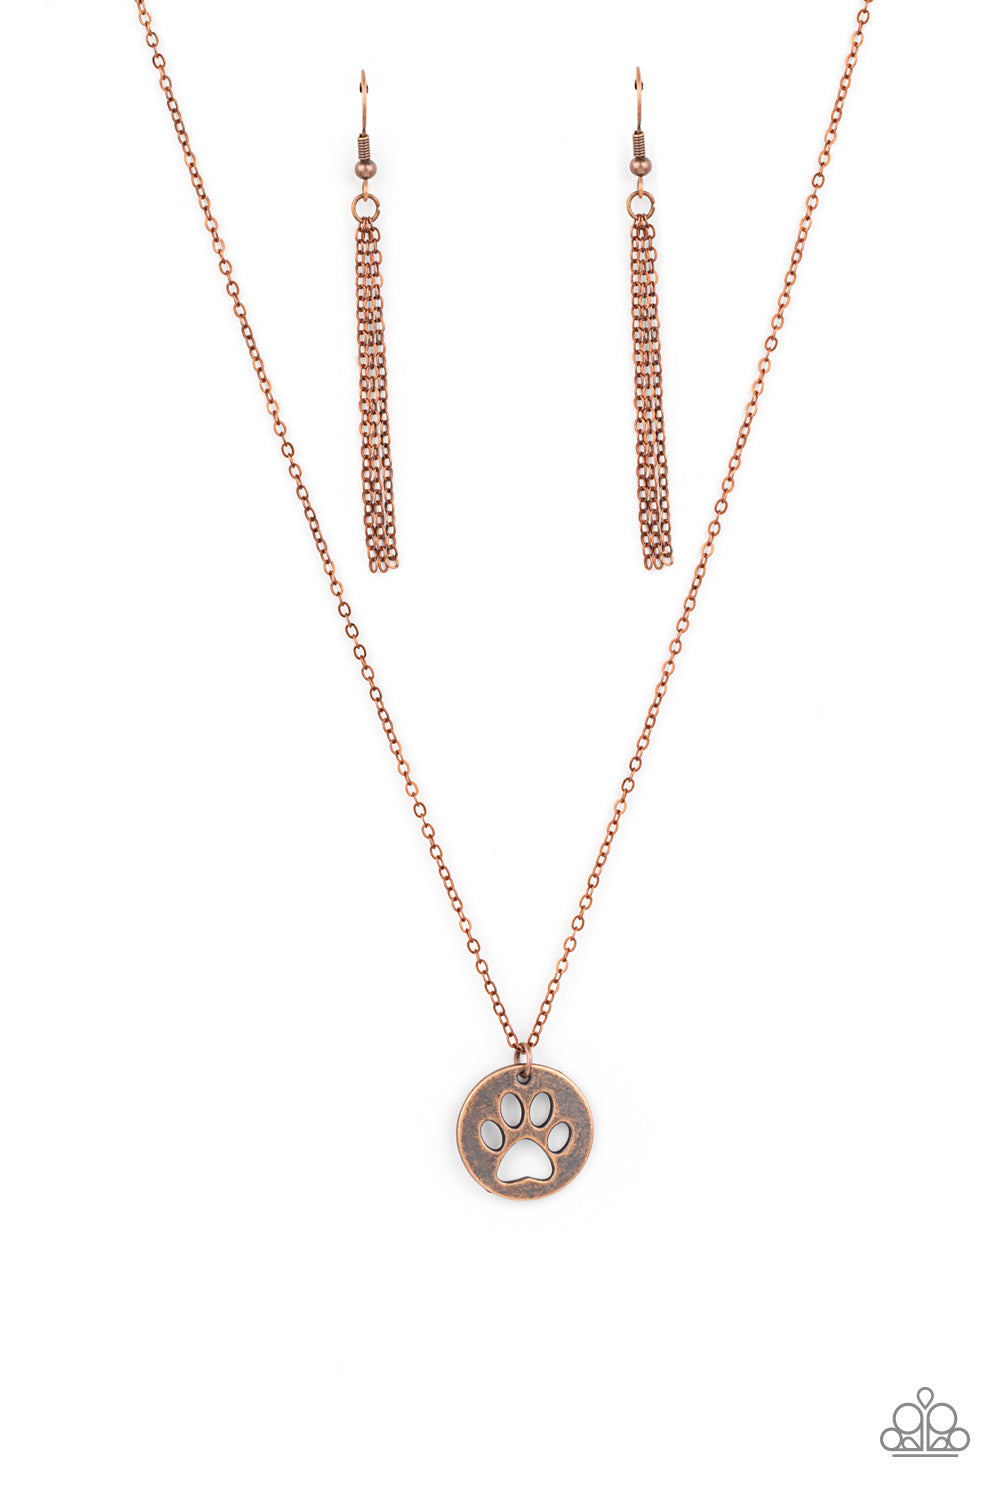 Think PAW-sitive - Copper Pawprint Cutout Disc Pendant Paparazzi Necklace & matching earrings